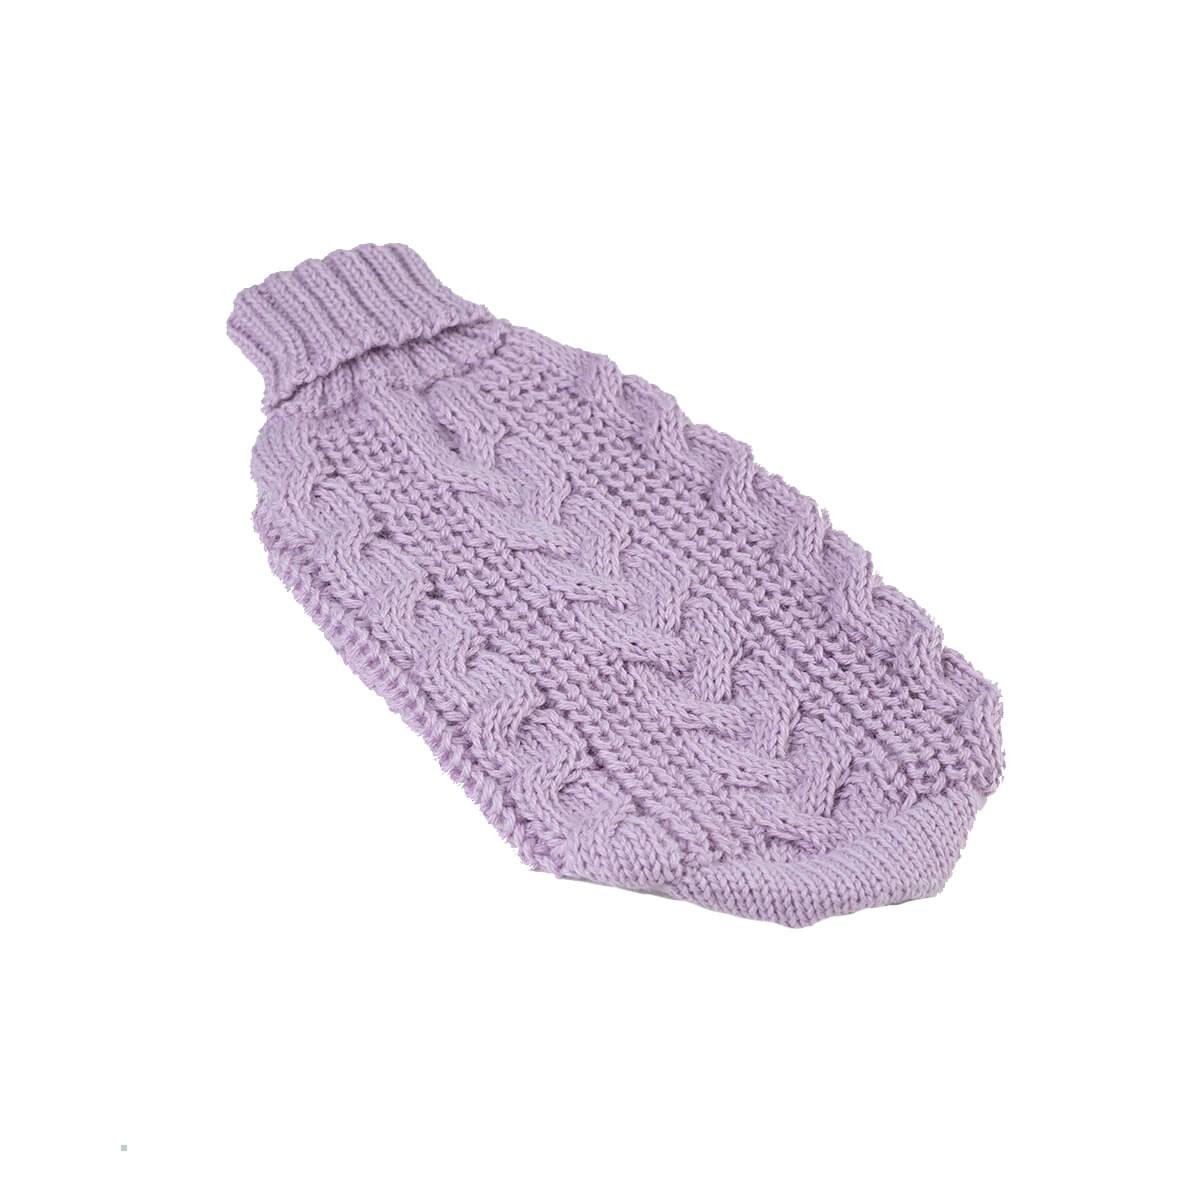 Alqo Wasi Chunky Cable Knit Alpaca Dog Sweater - Lavender